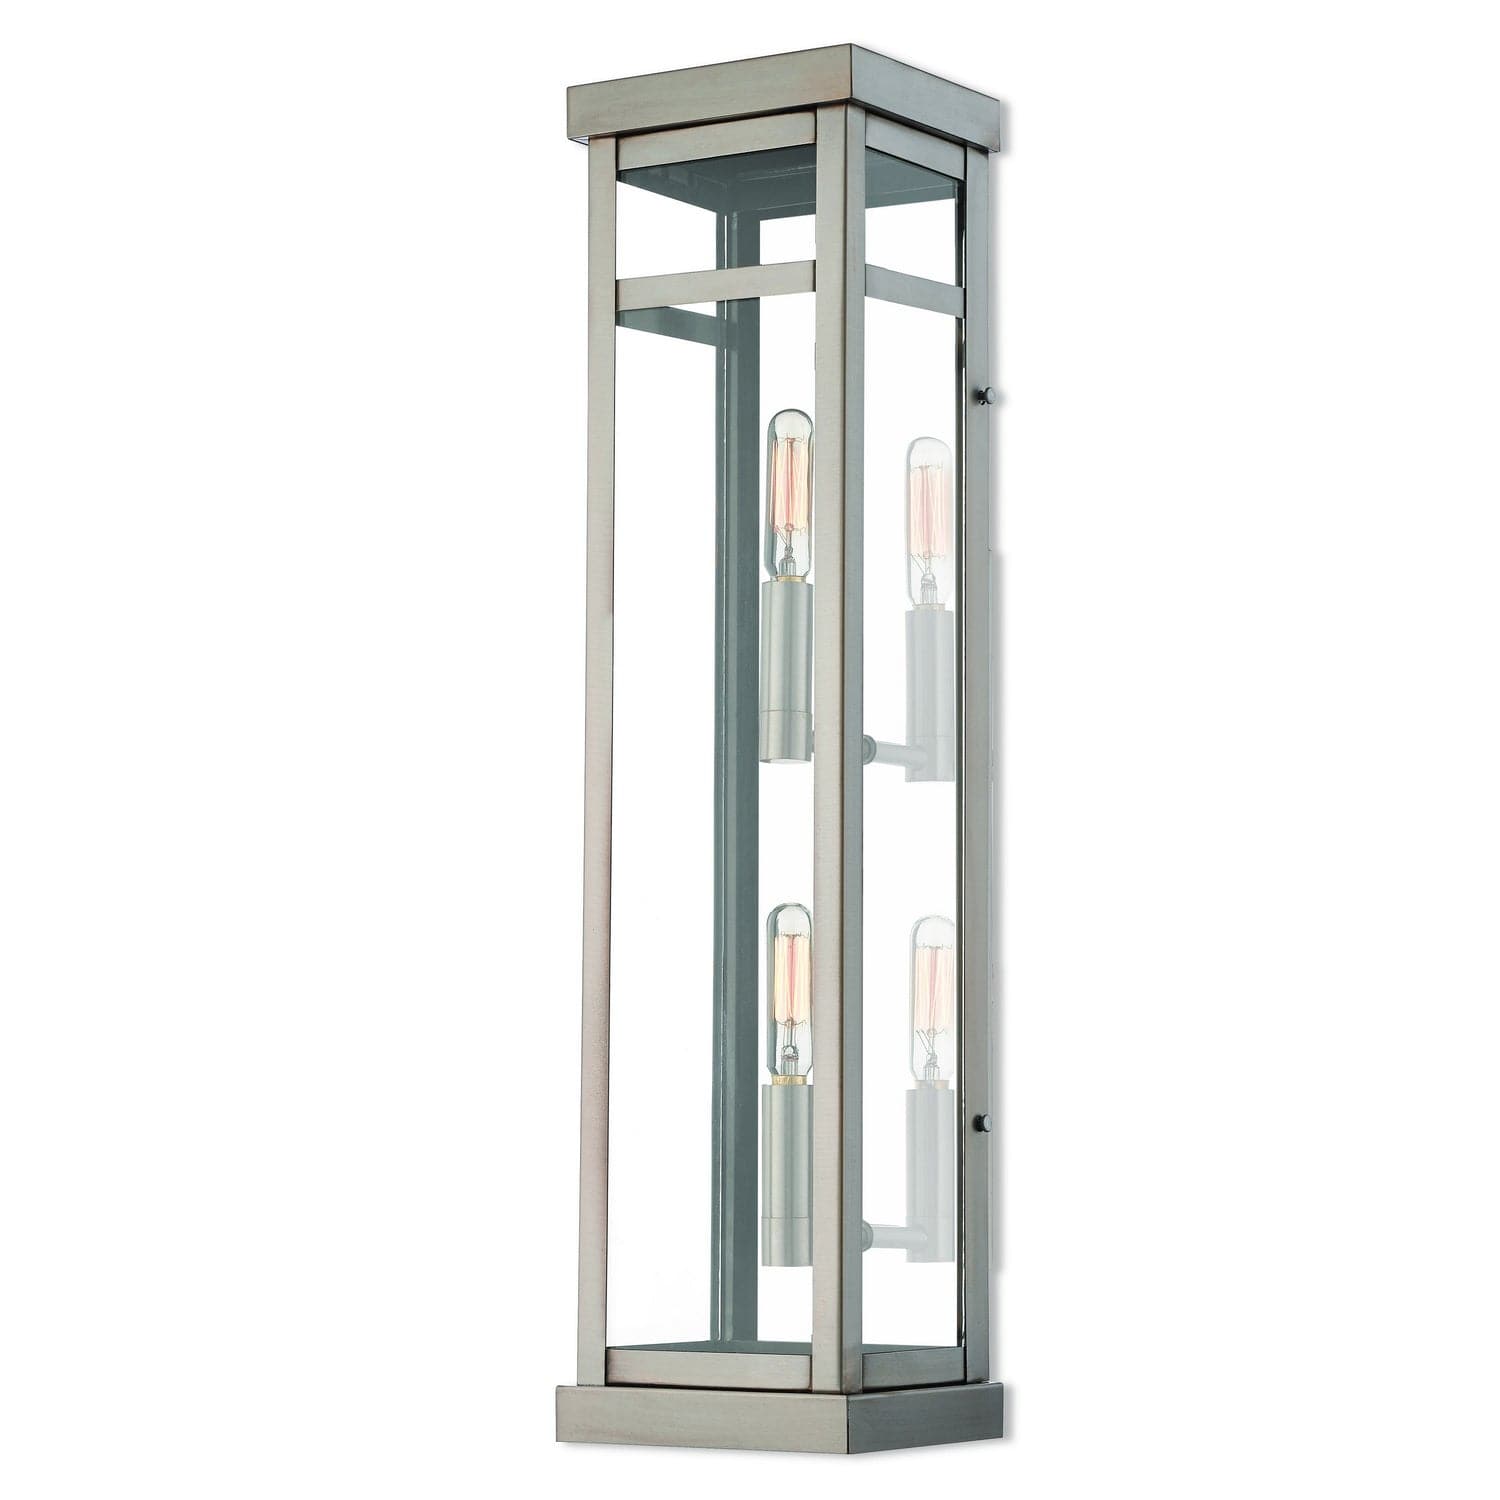 Livex Lighting - 20706-91 - Two Light Outdoor Wall Lantern - Hopewell - Brushed Nickel w/ Polished Chrome Stainless Steel